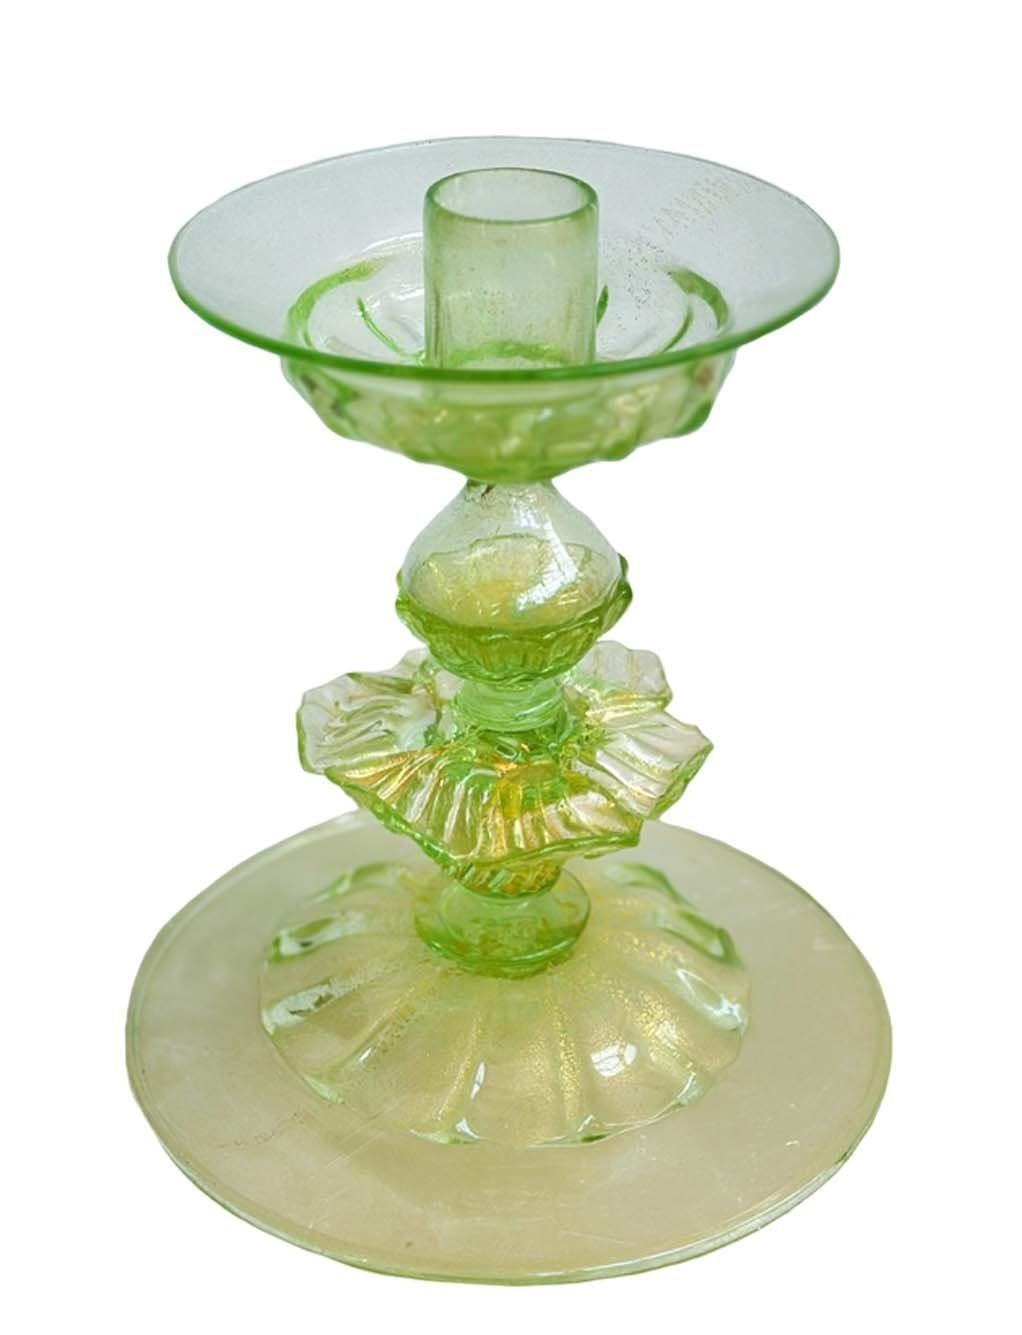 Set of four green Murano glass candlesticks with shiny gold flecks and ribbed details. In the style of Salviati. Made in Italy, c. 1950's.
Dimensions (each):
6